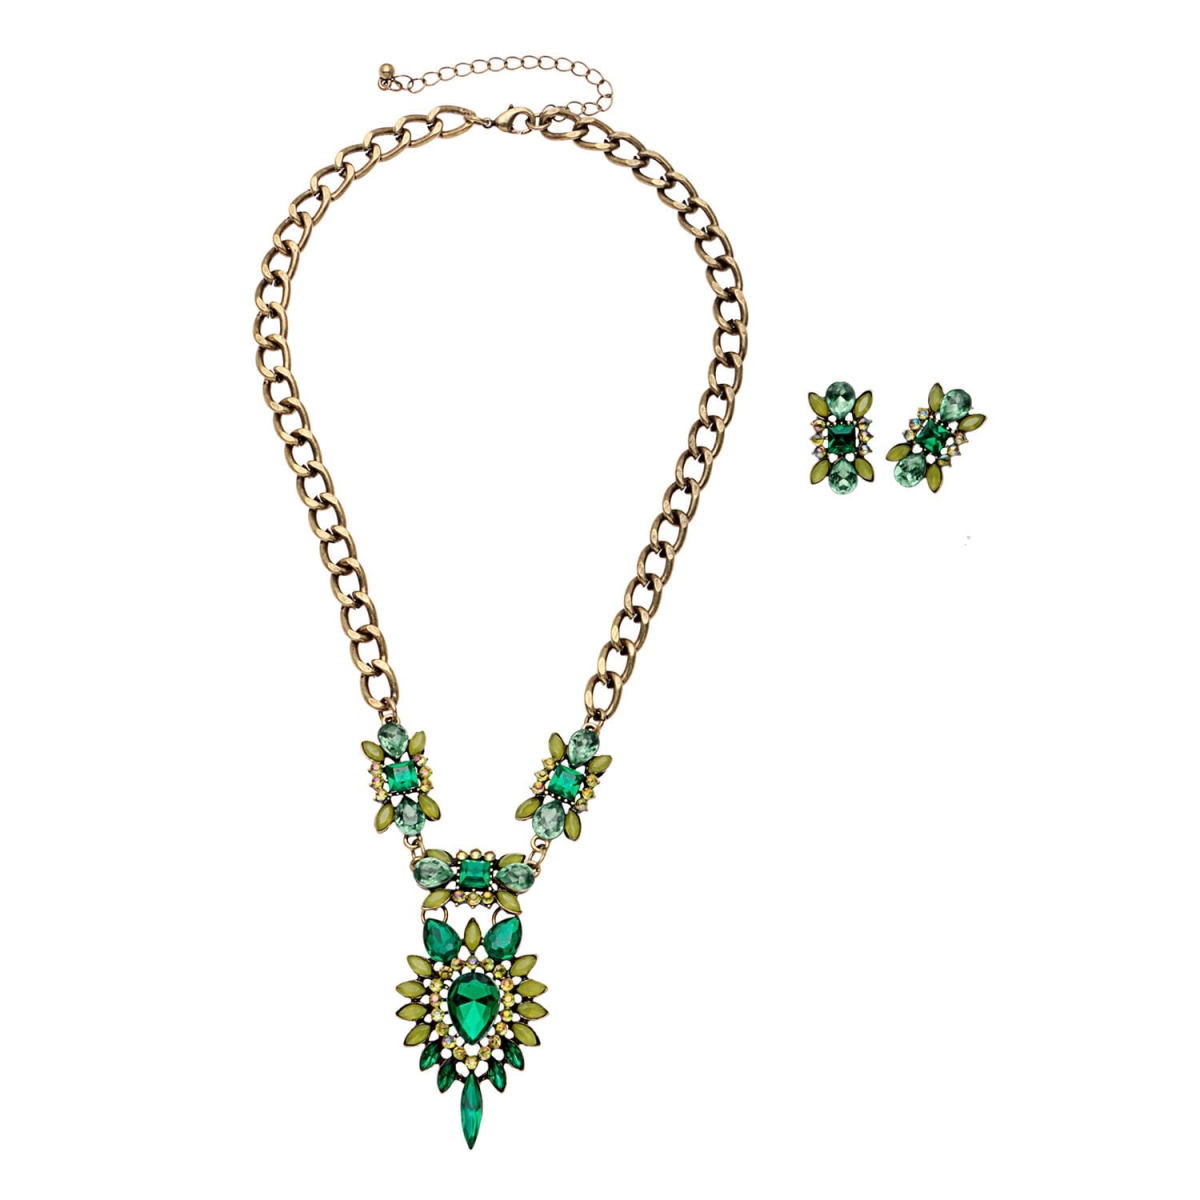 Picture of J&H Designs 7586-NE-Green Navette Flower Front Pendant Necklace and Earrings Jewelry Set